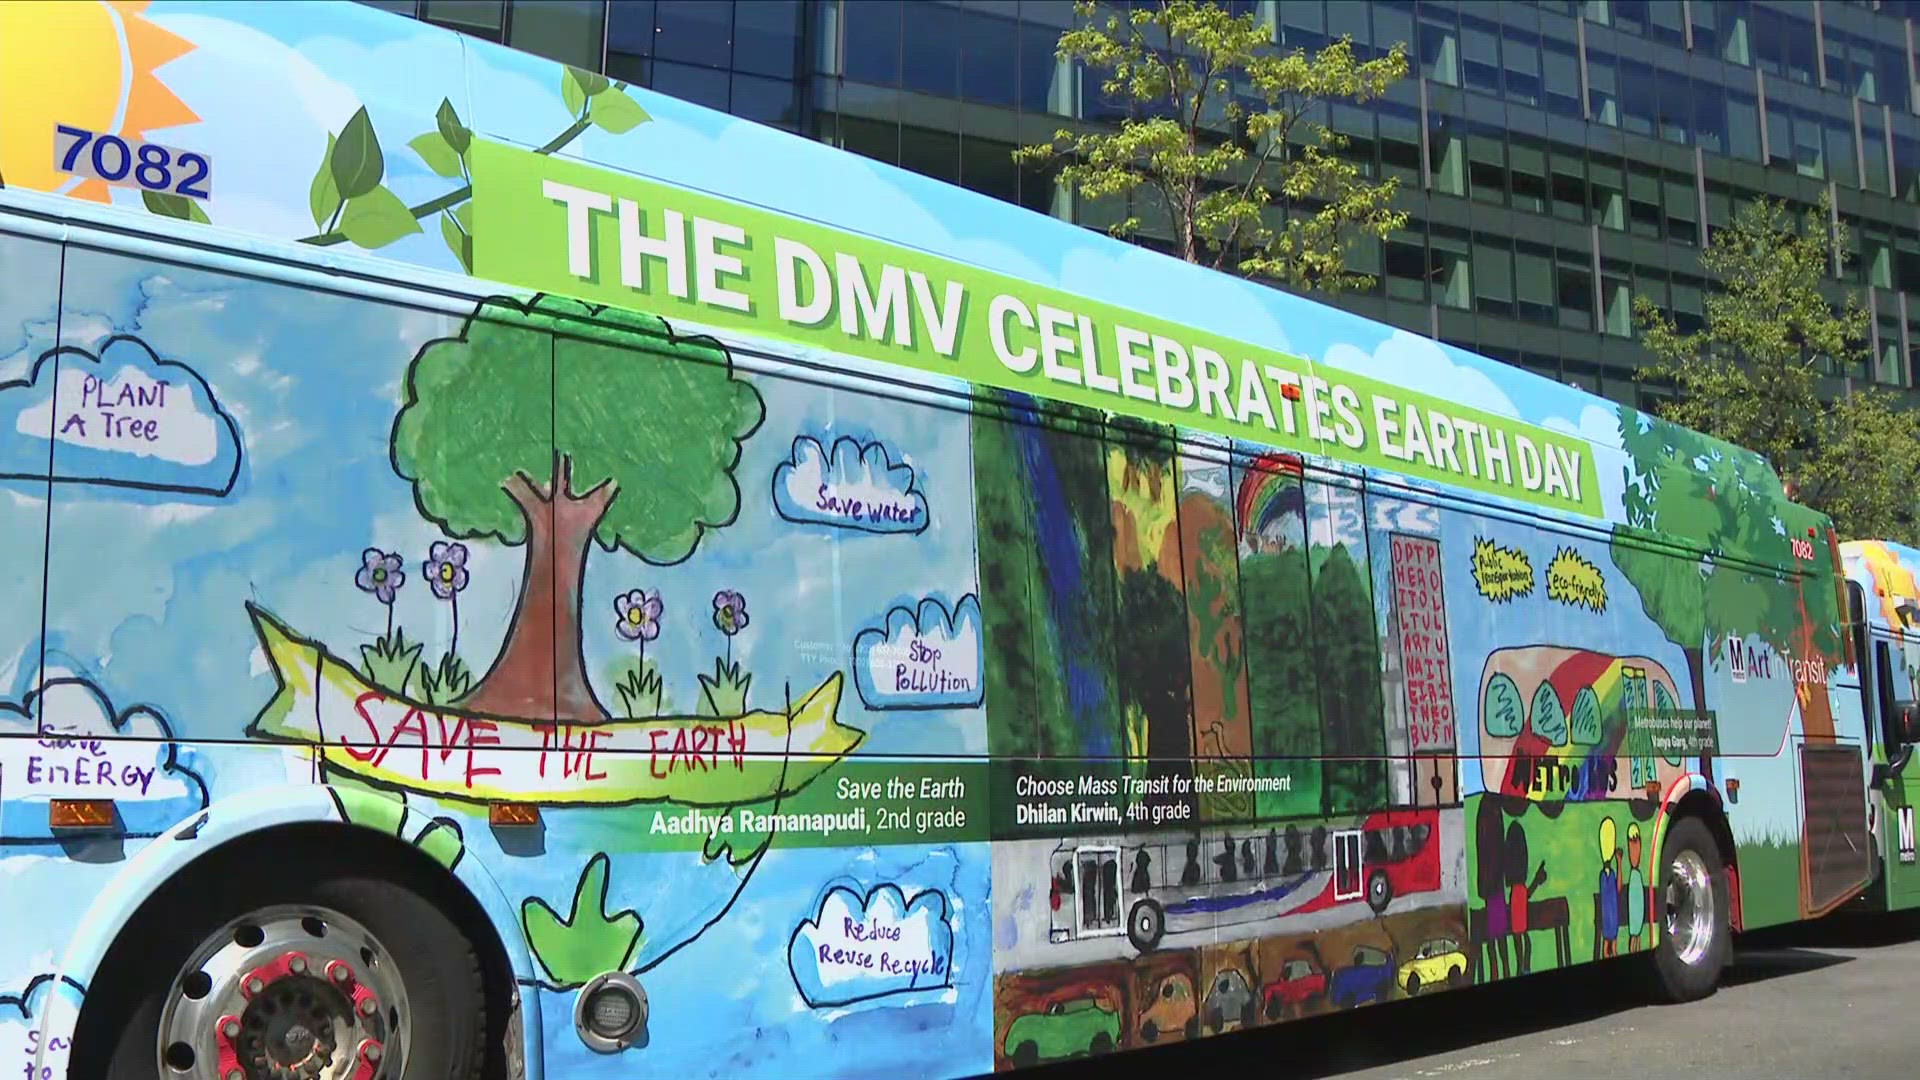 WMATA'S HEADQUARTERS IN SOUTHWEST DC....
WHERE THE AGENCY IS UNVEILING SPECIALLY DESIGNED BUSES IN HONOR OF EARTH DAY.